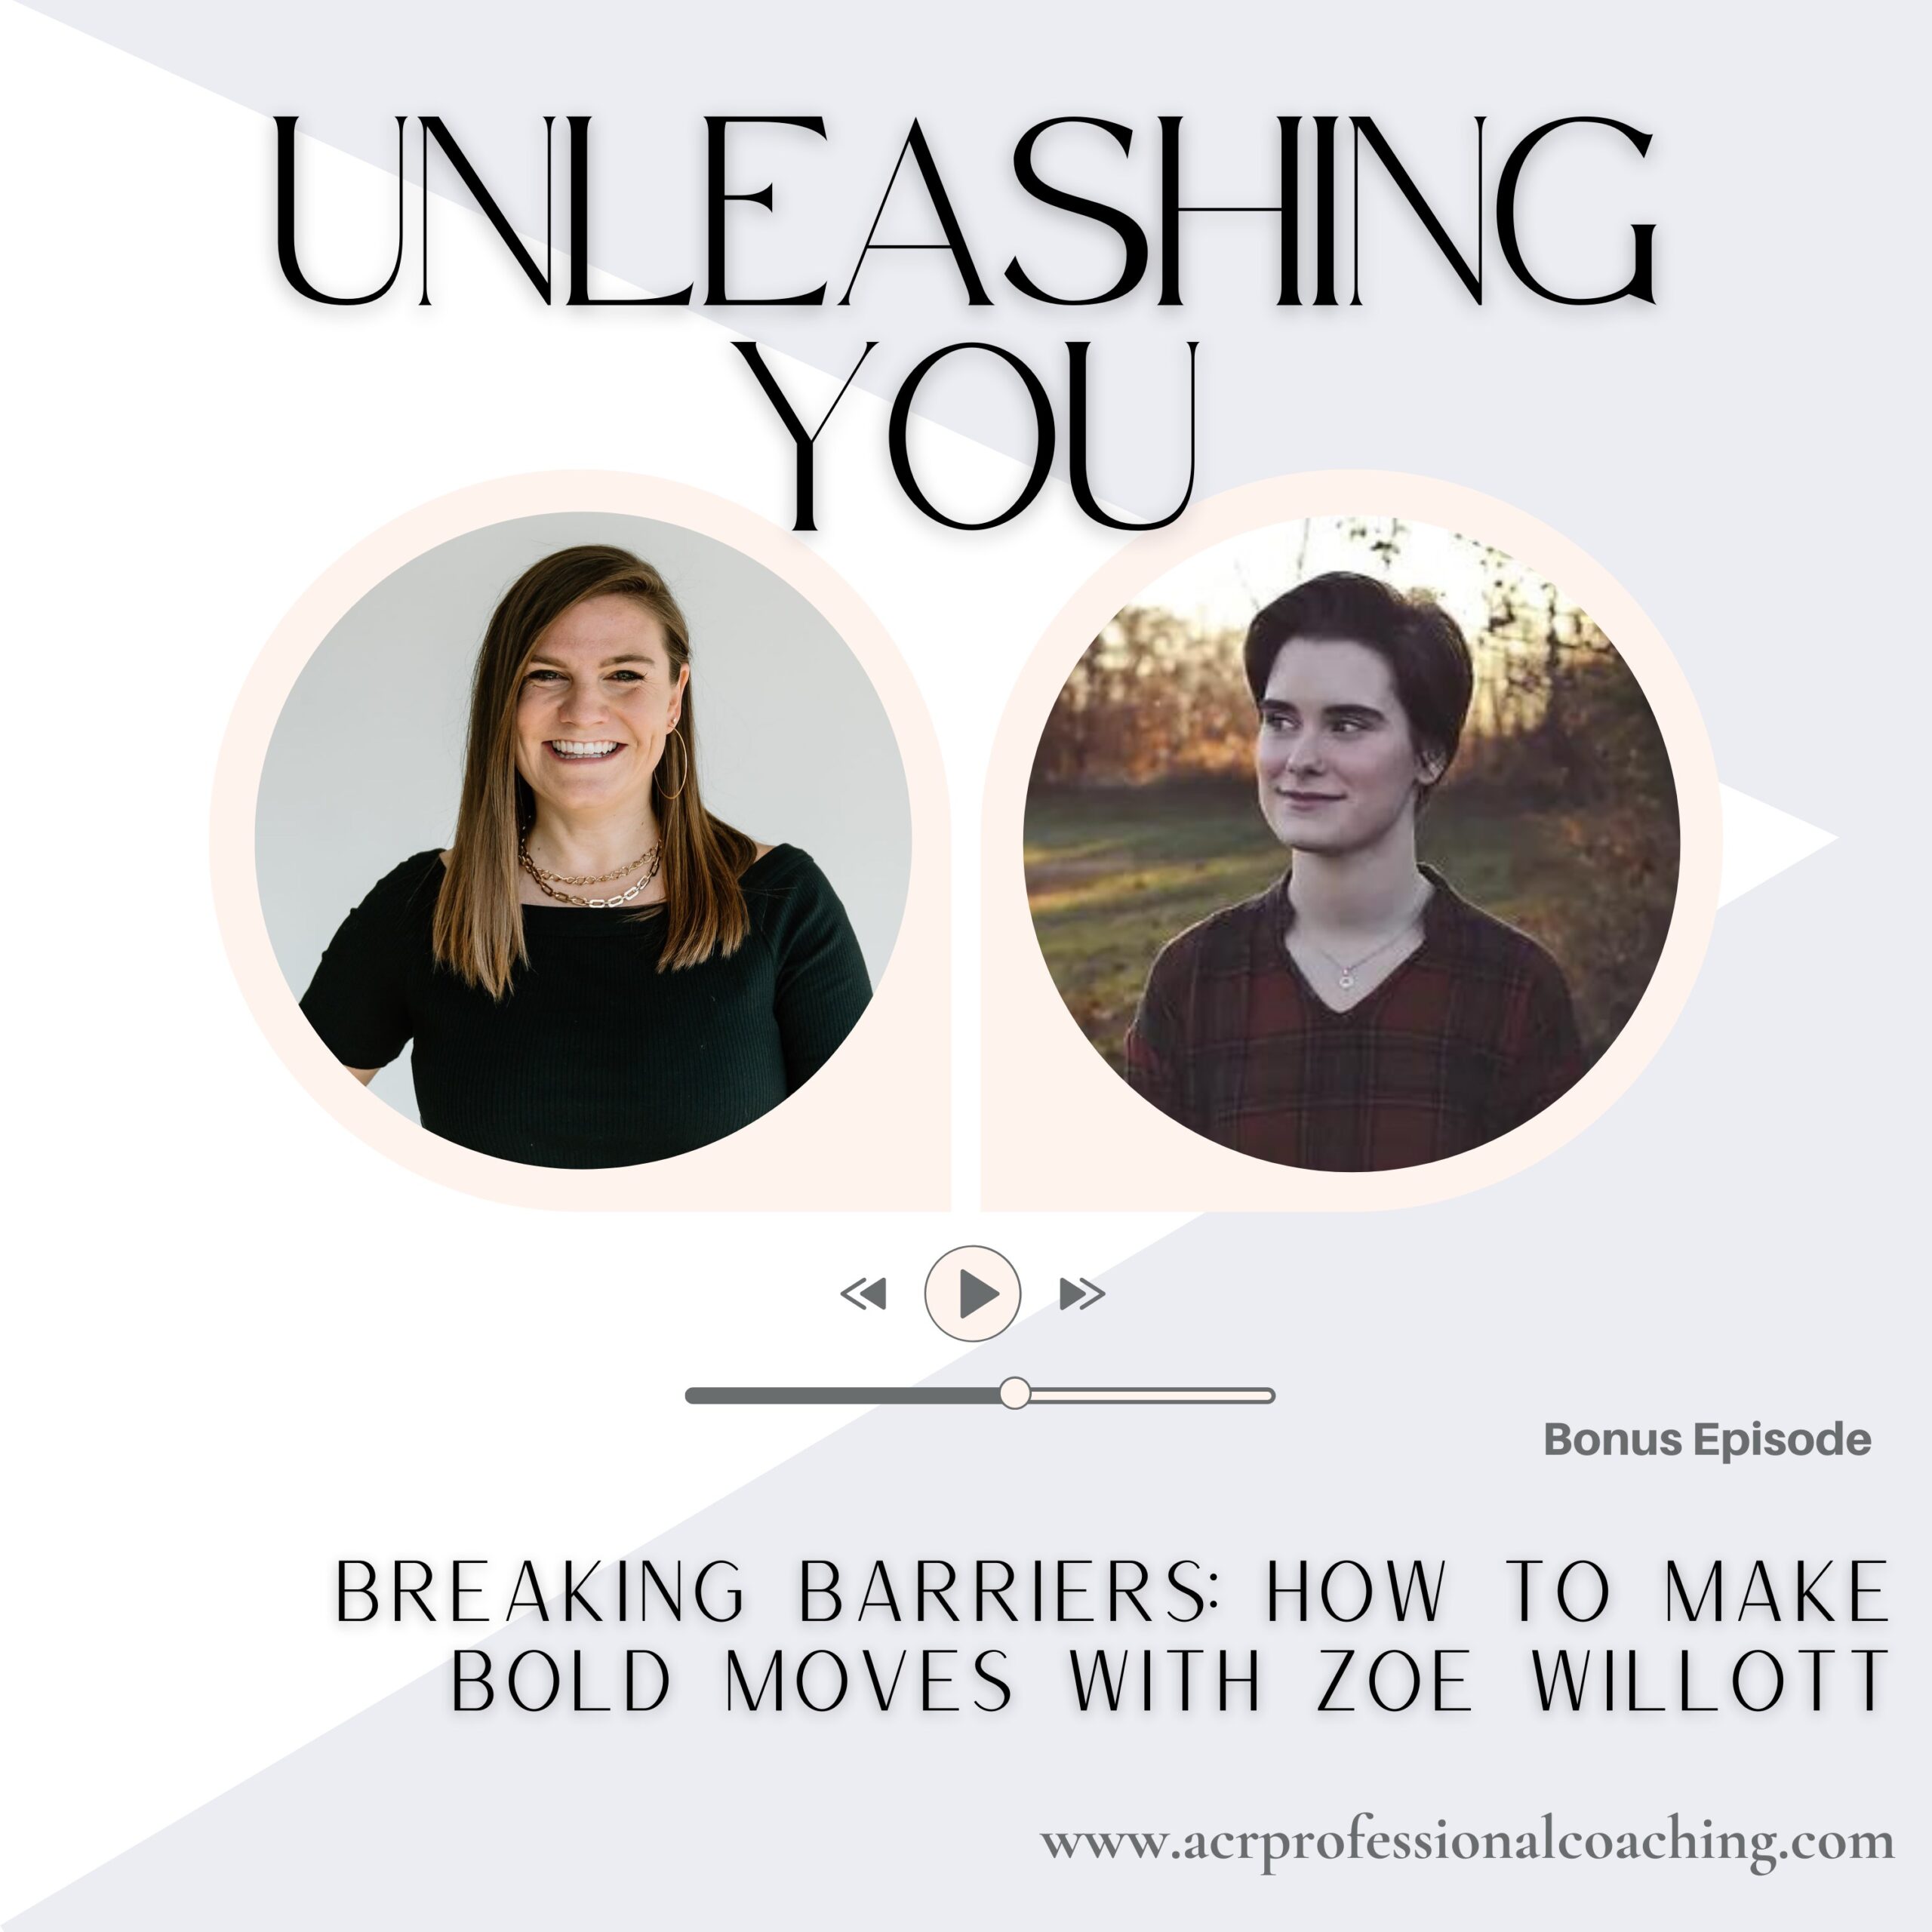 Breaking Barriers: How to Make Bold Moves with Zoe Willott